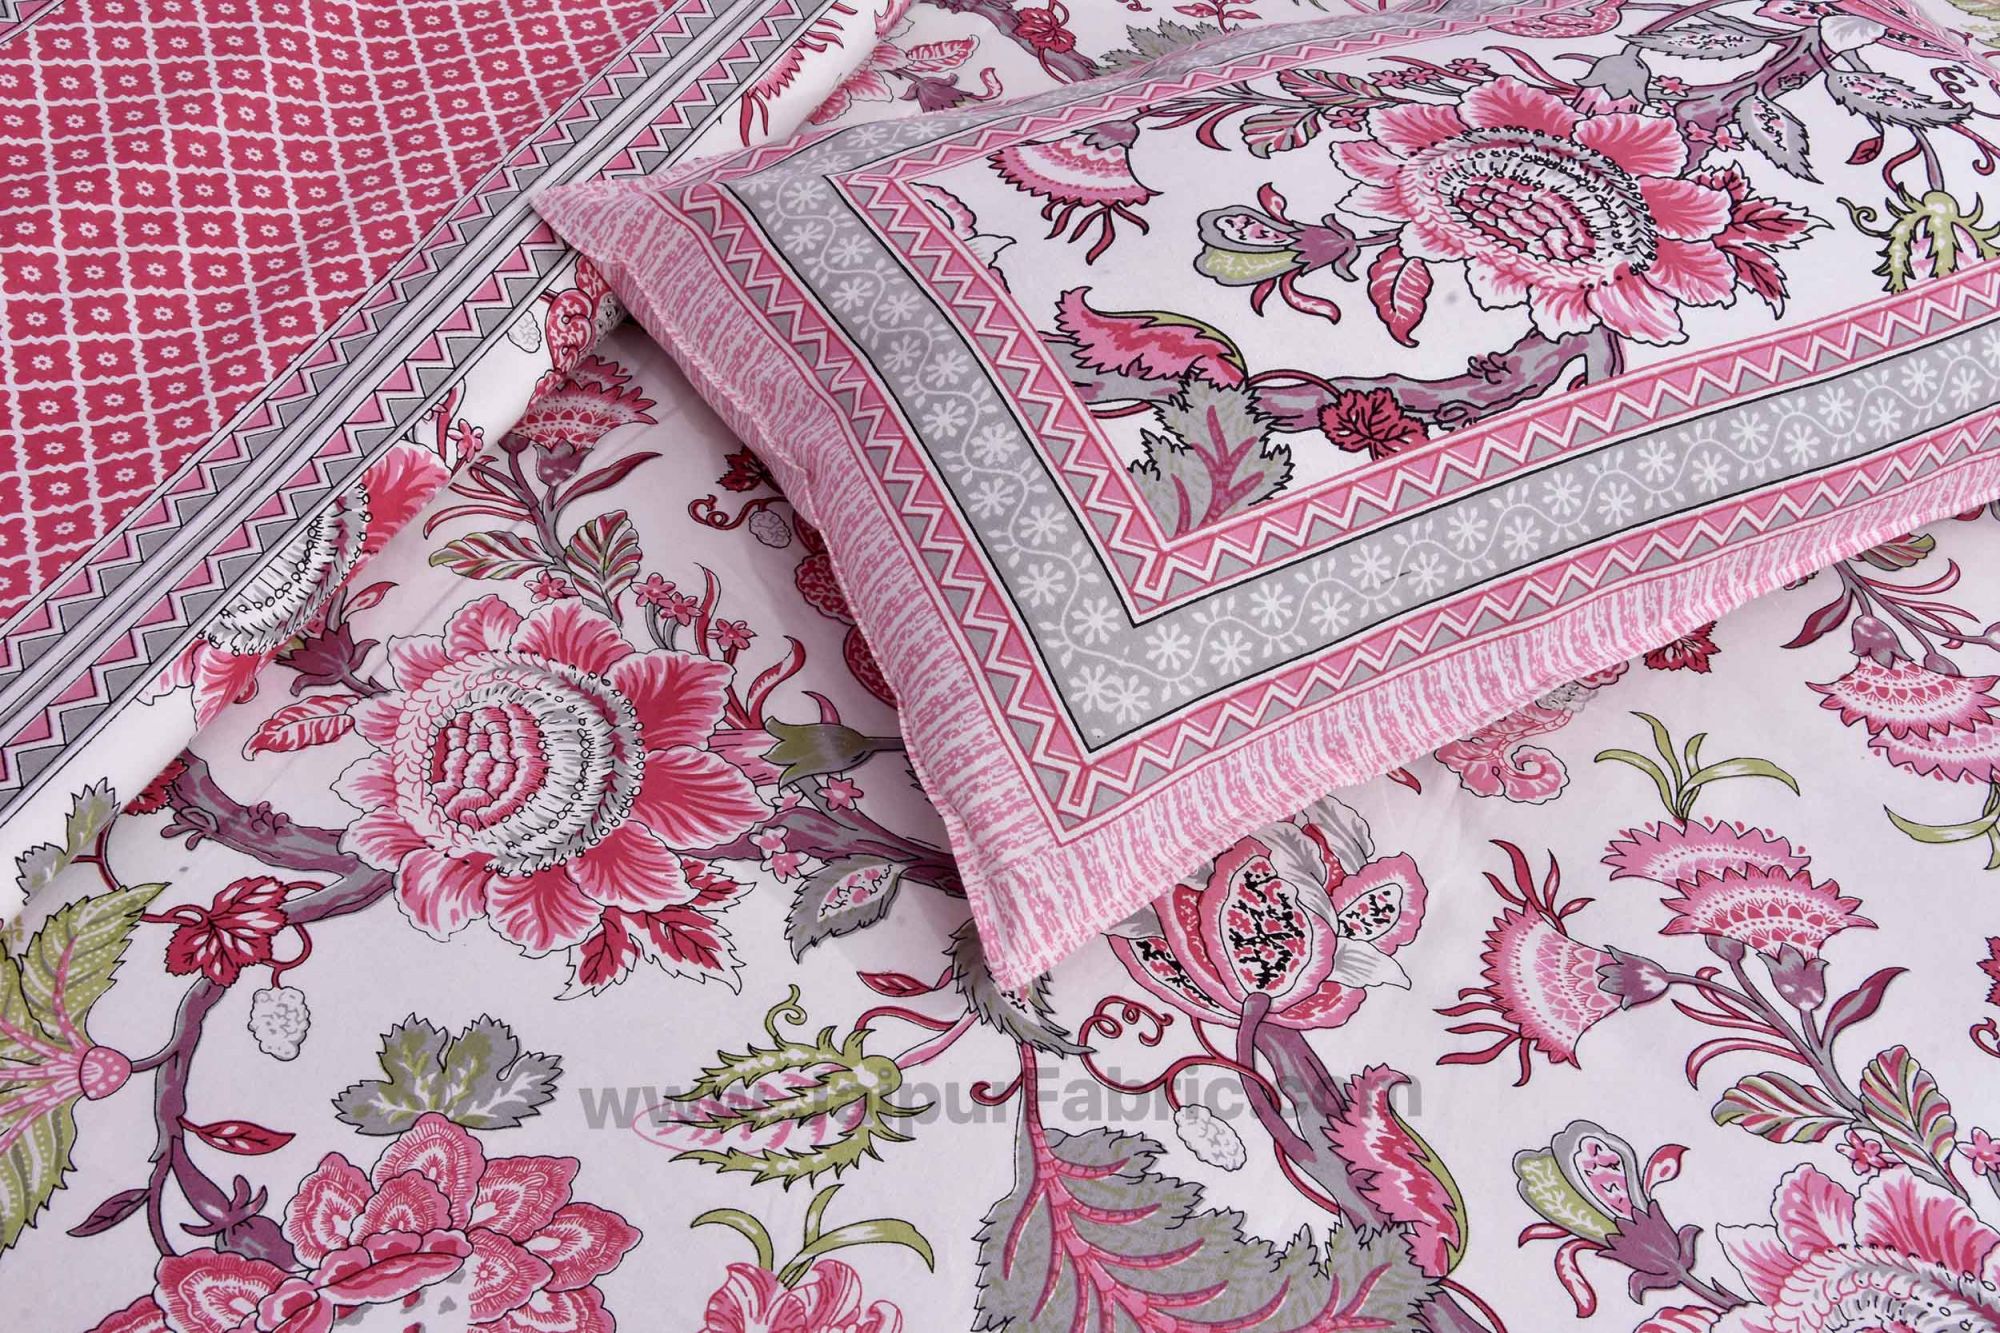 Combo372 Bed in a Bag Pink Floral  1 Dohar + 1 Double BedSheet + 2 Pillow Covers